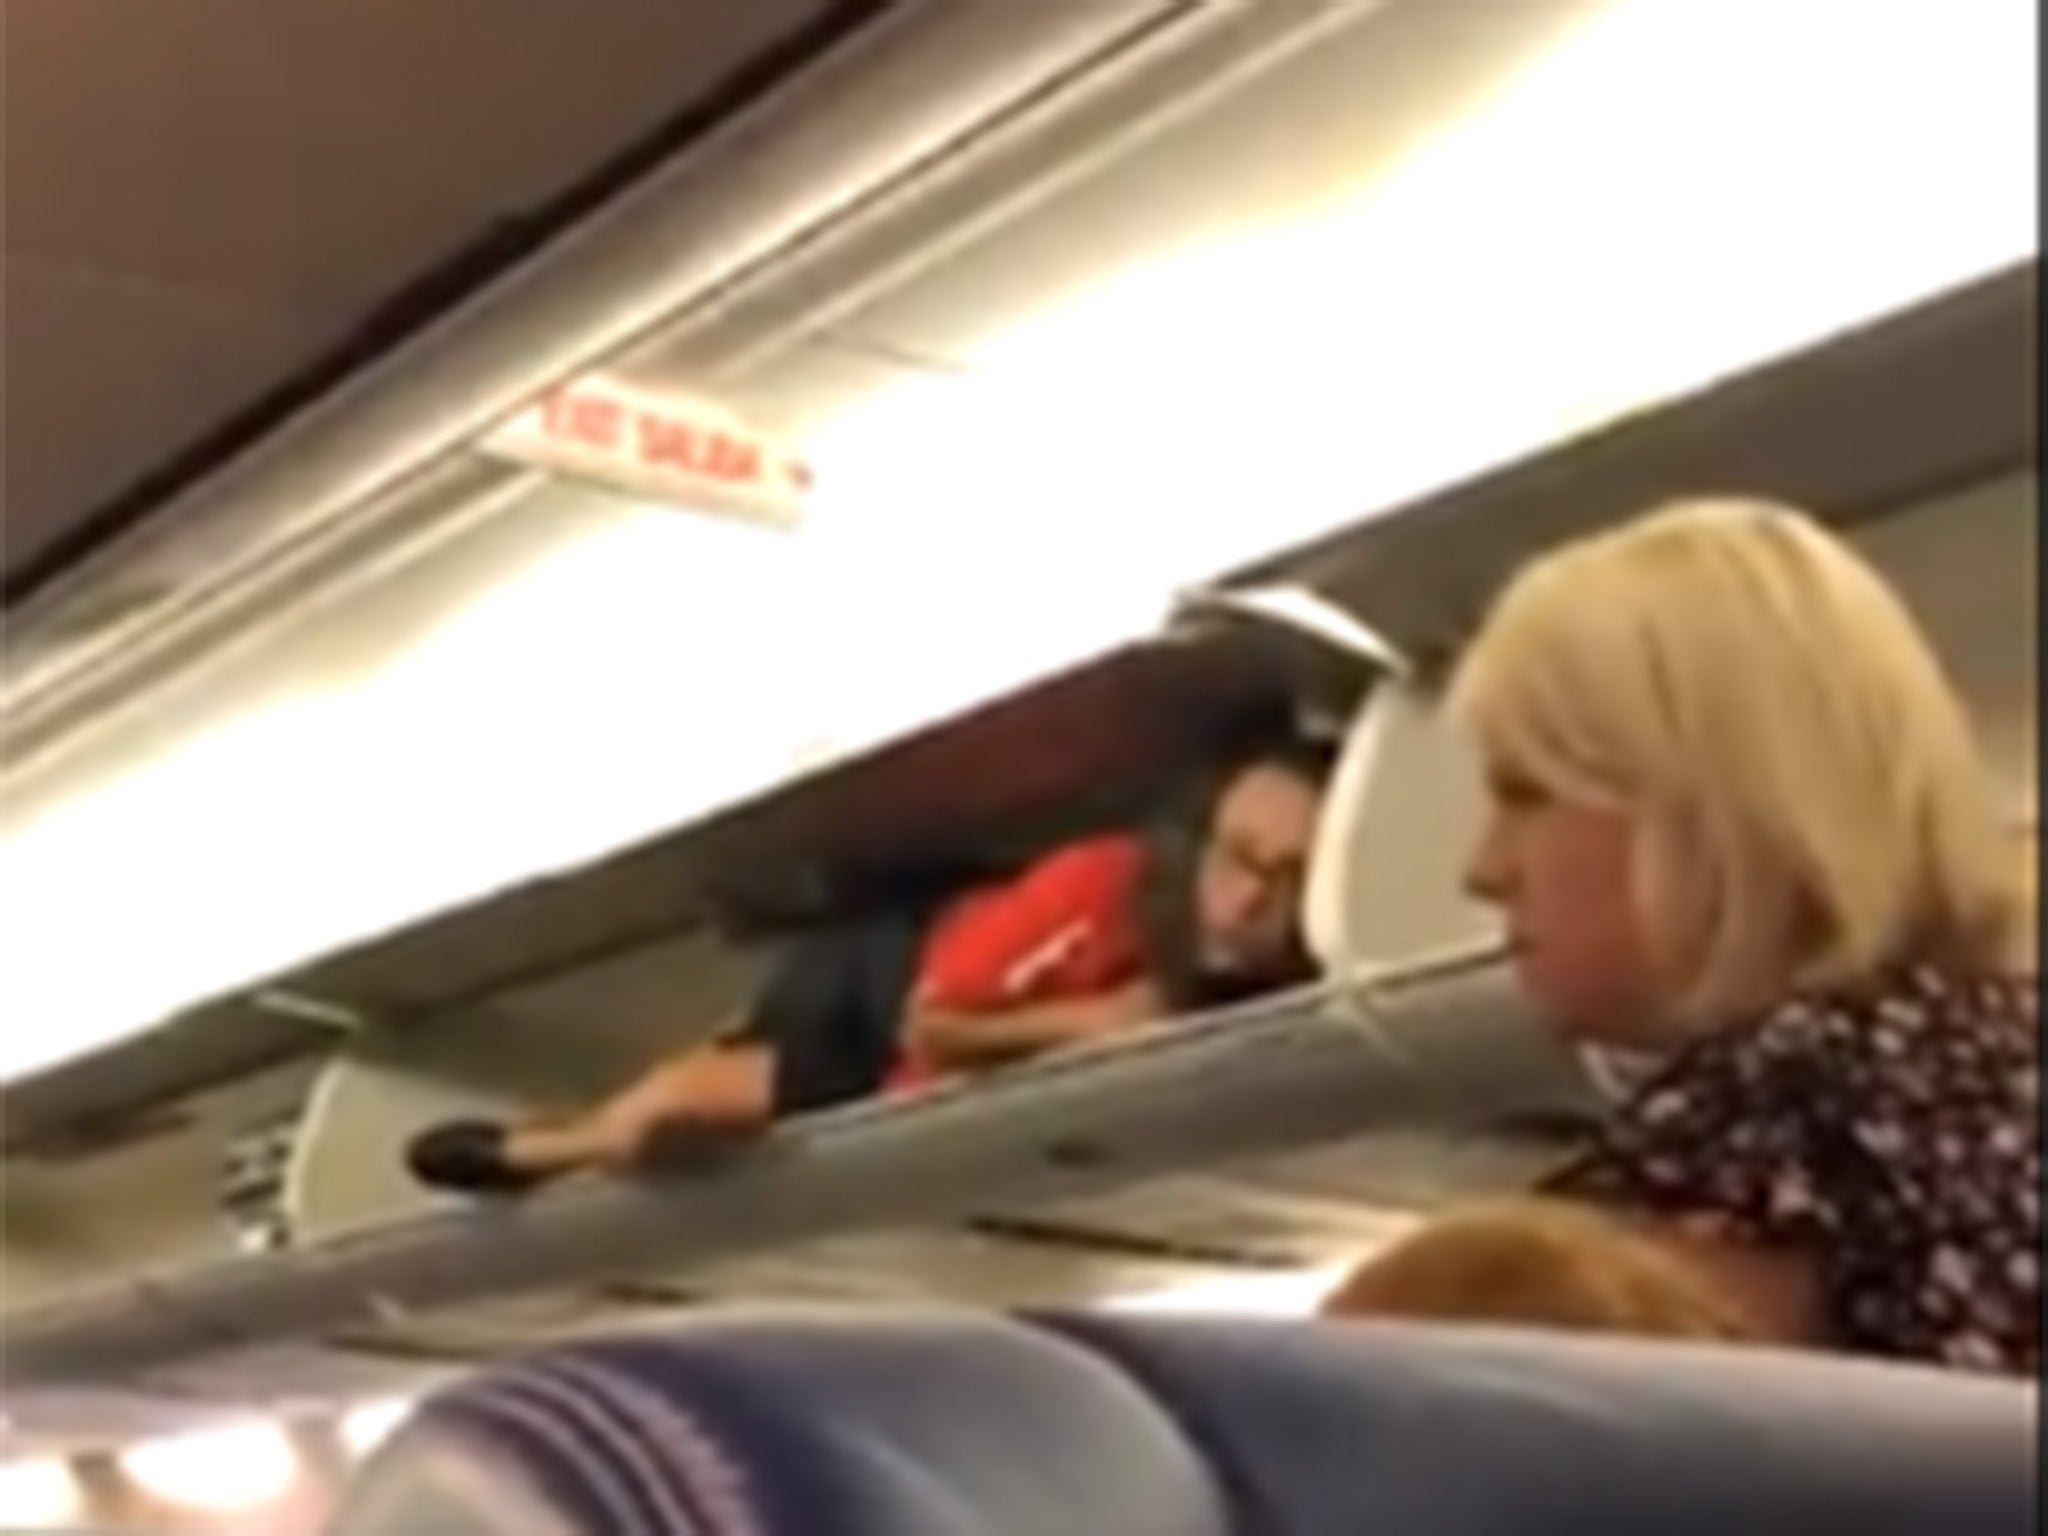 Flight attendant found hiding in overhead luggage bin: 'I can't get over how weird this is'